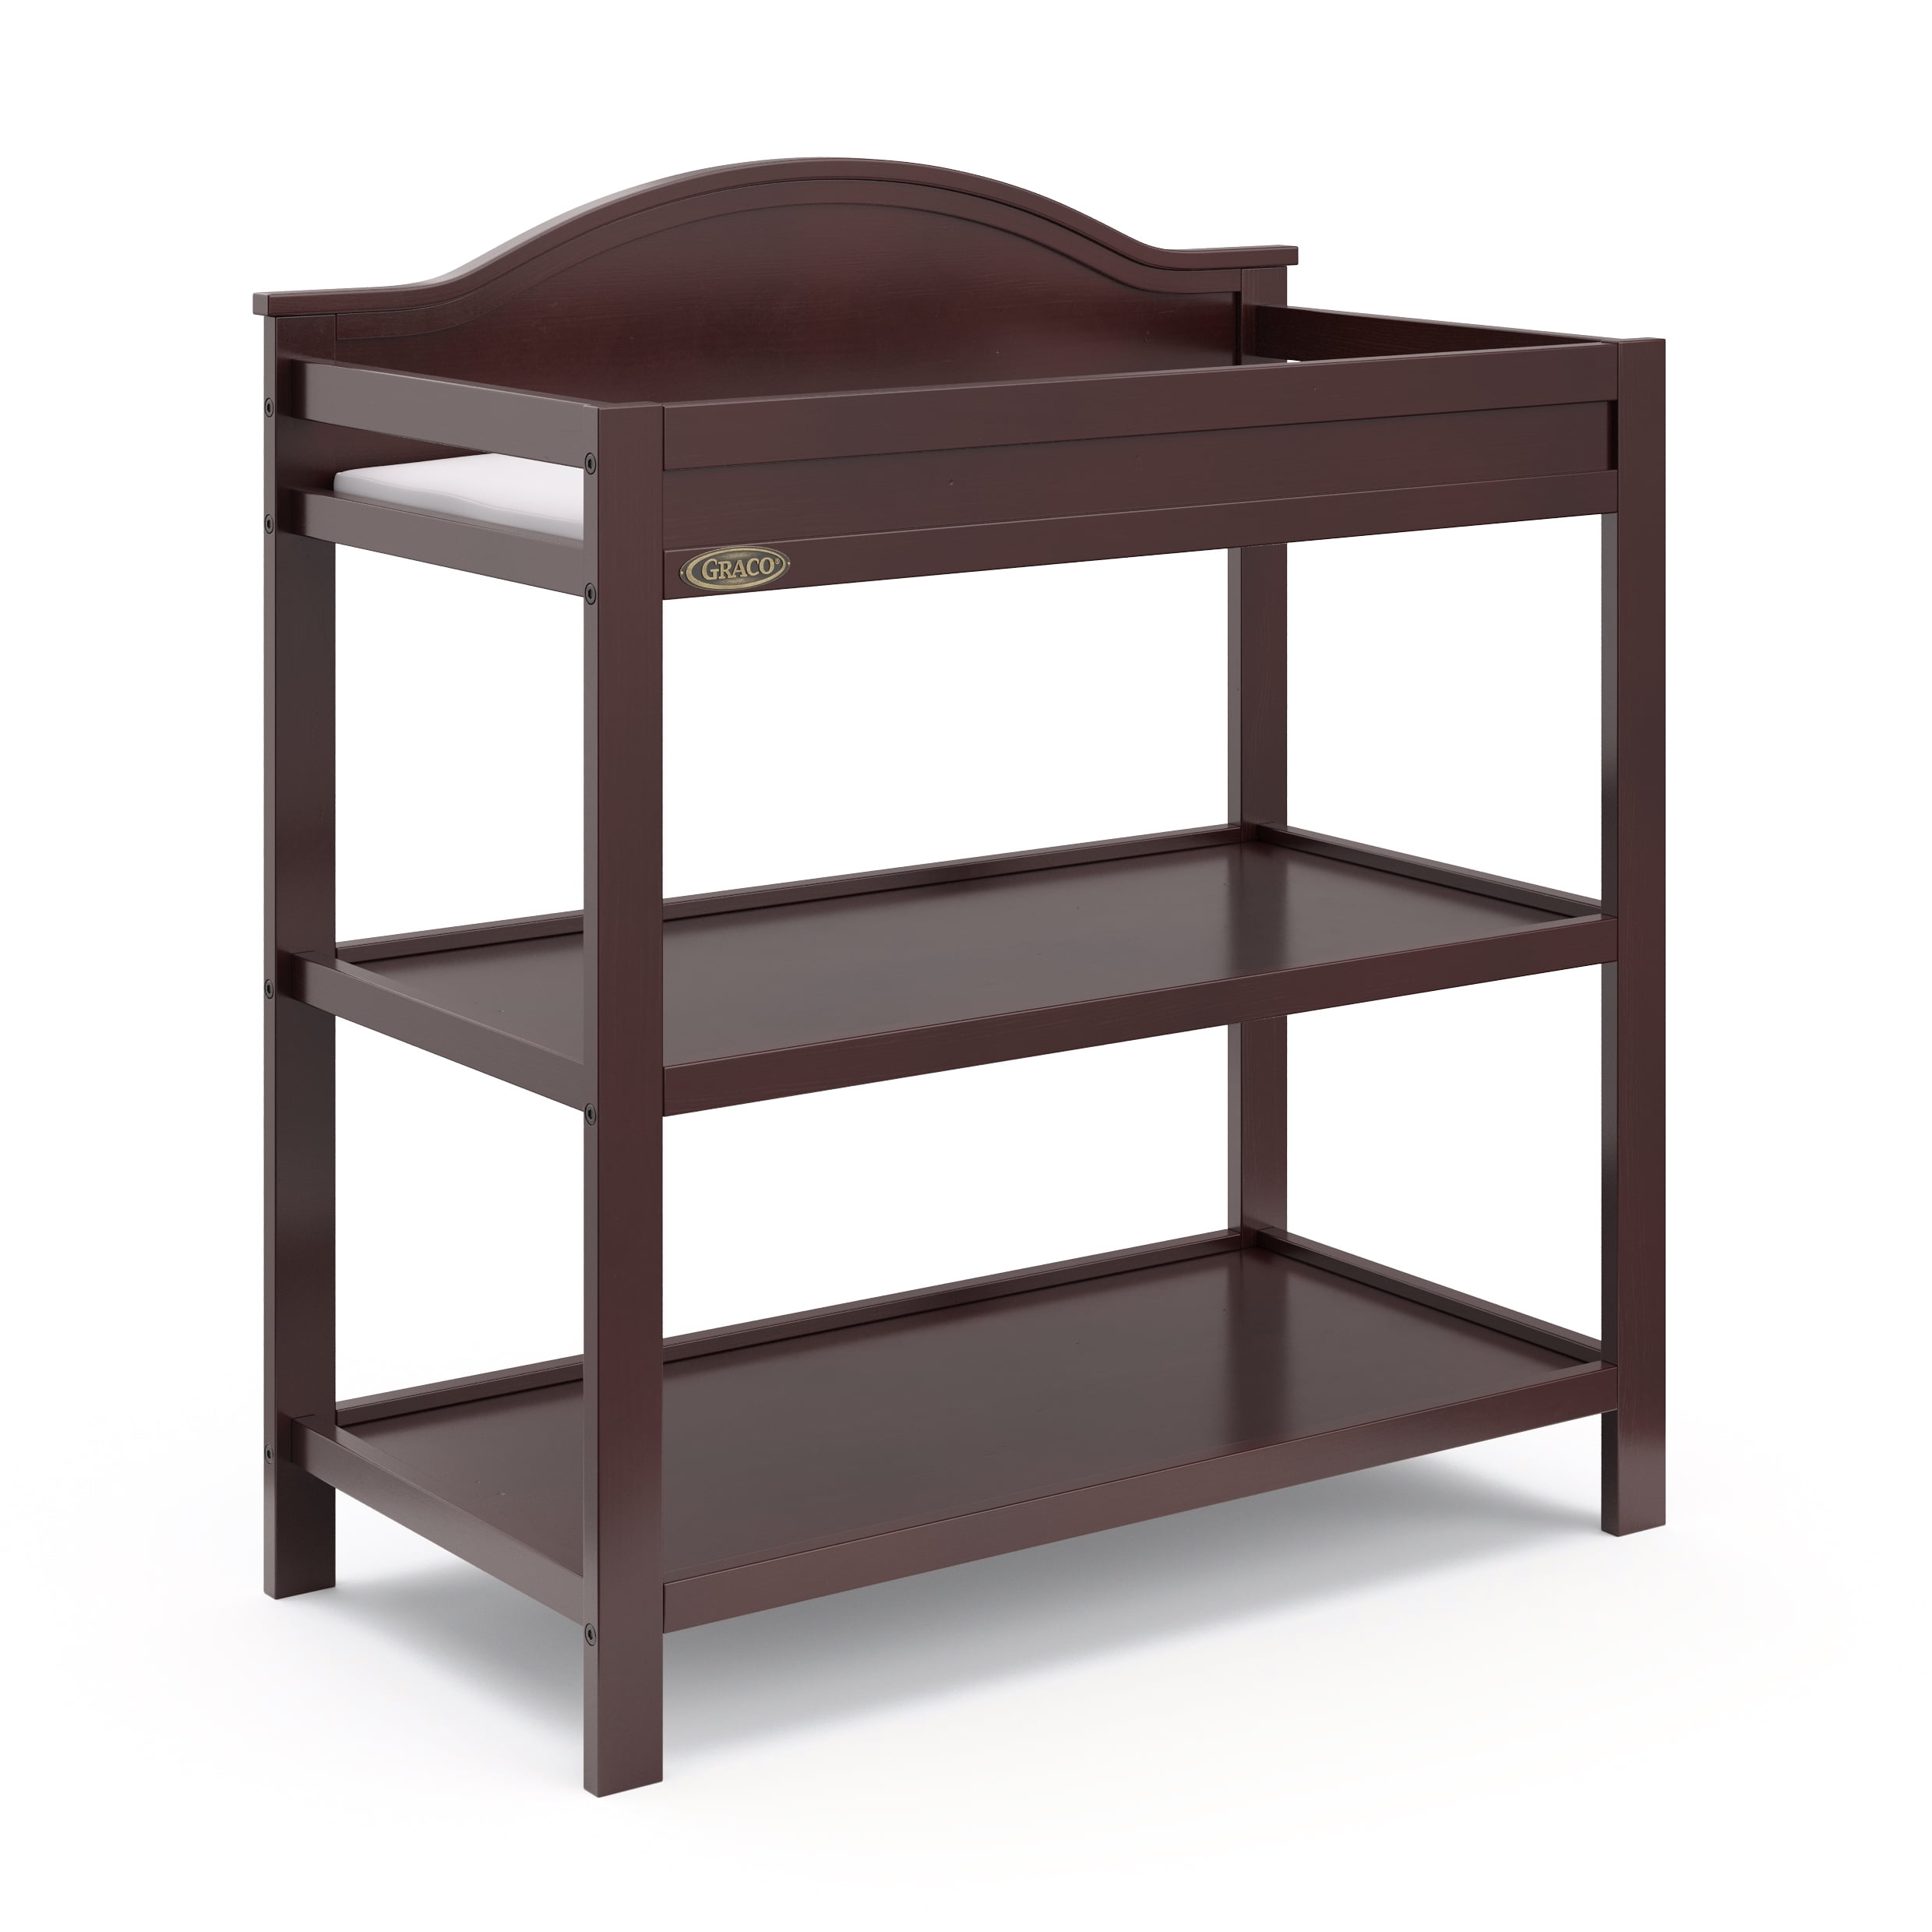 graco changing table espresso